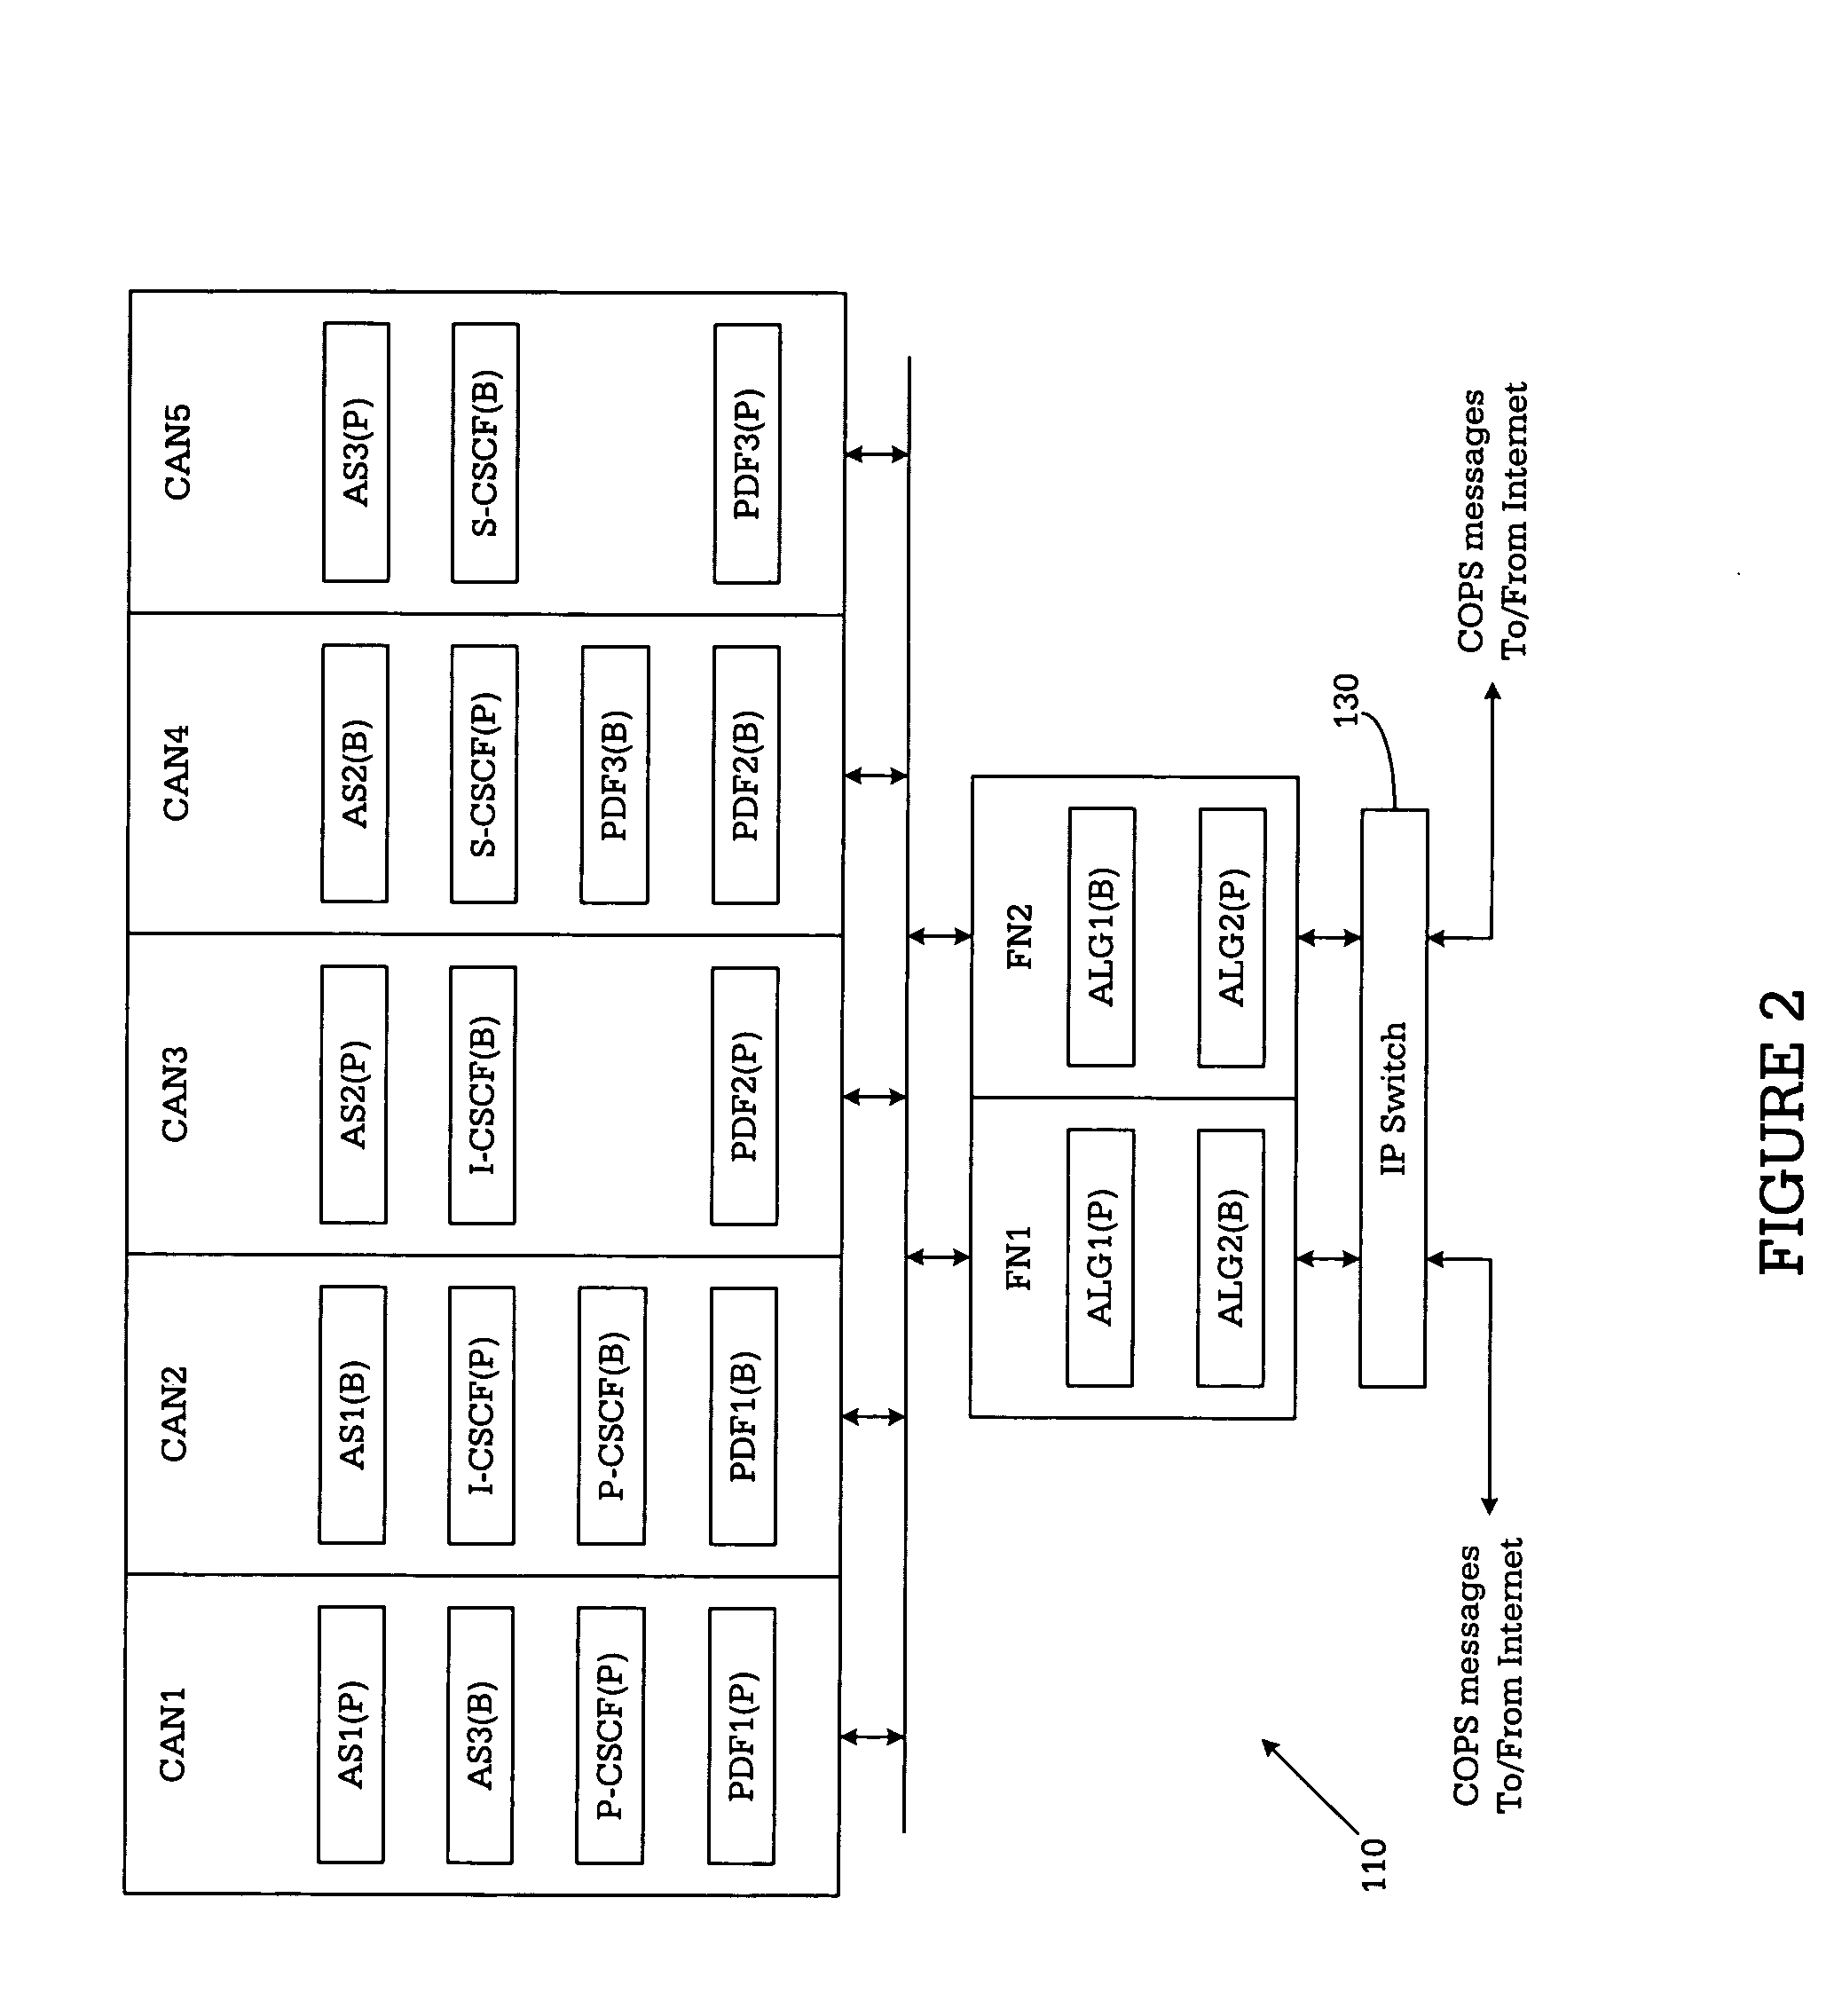 System and method for scalable and redundant COPS message routing in an IP multimedia subsystem